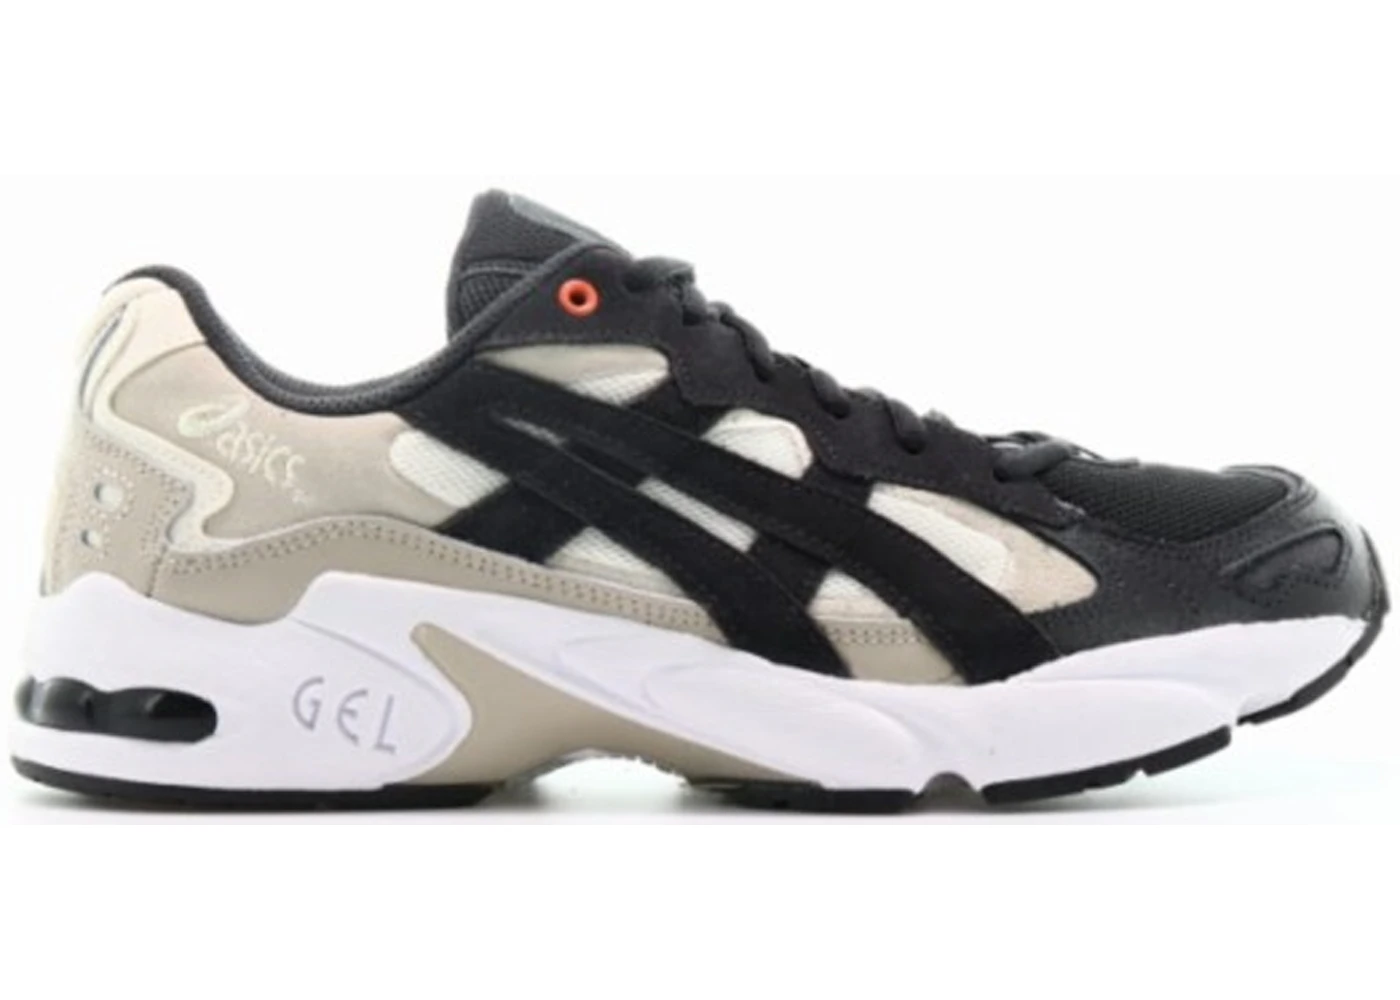 ASICS Gel-Kayano 5 Reigning Champ Kyoto Edition Men's - 1021A167